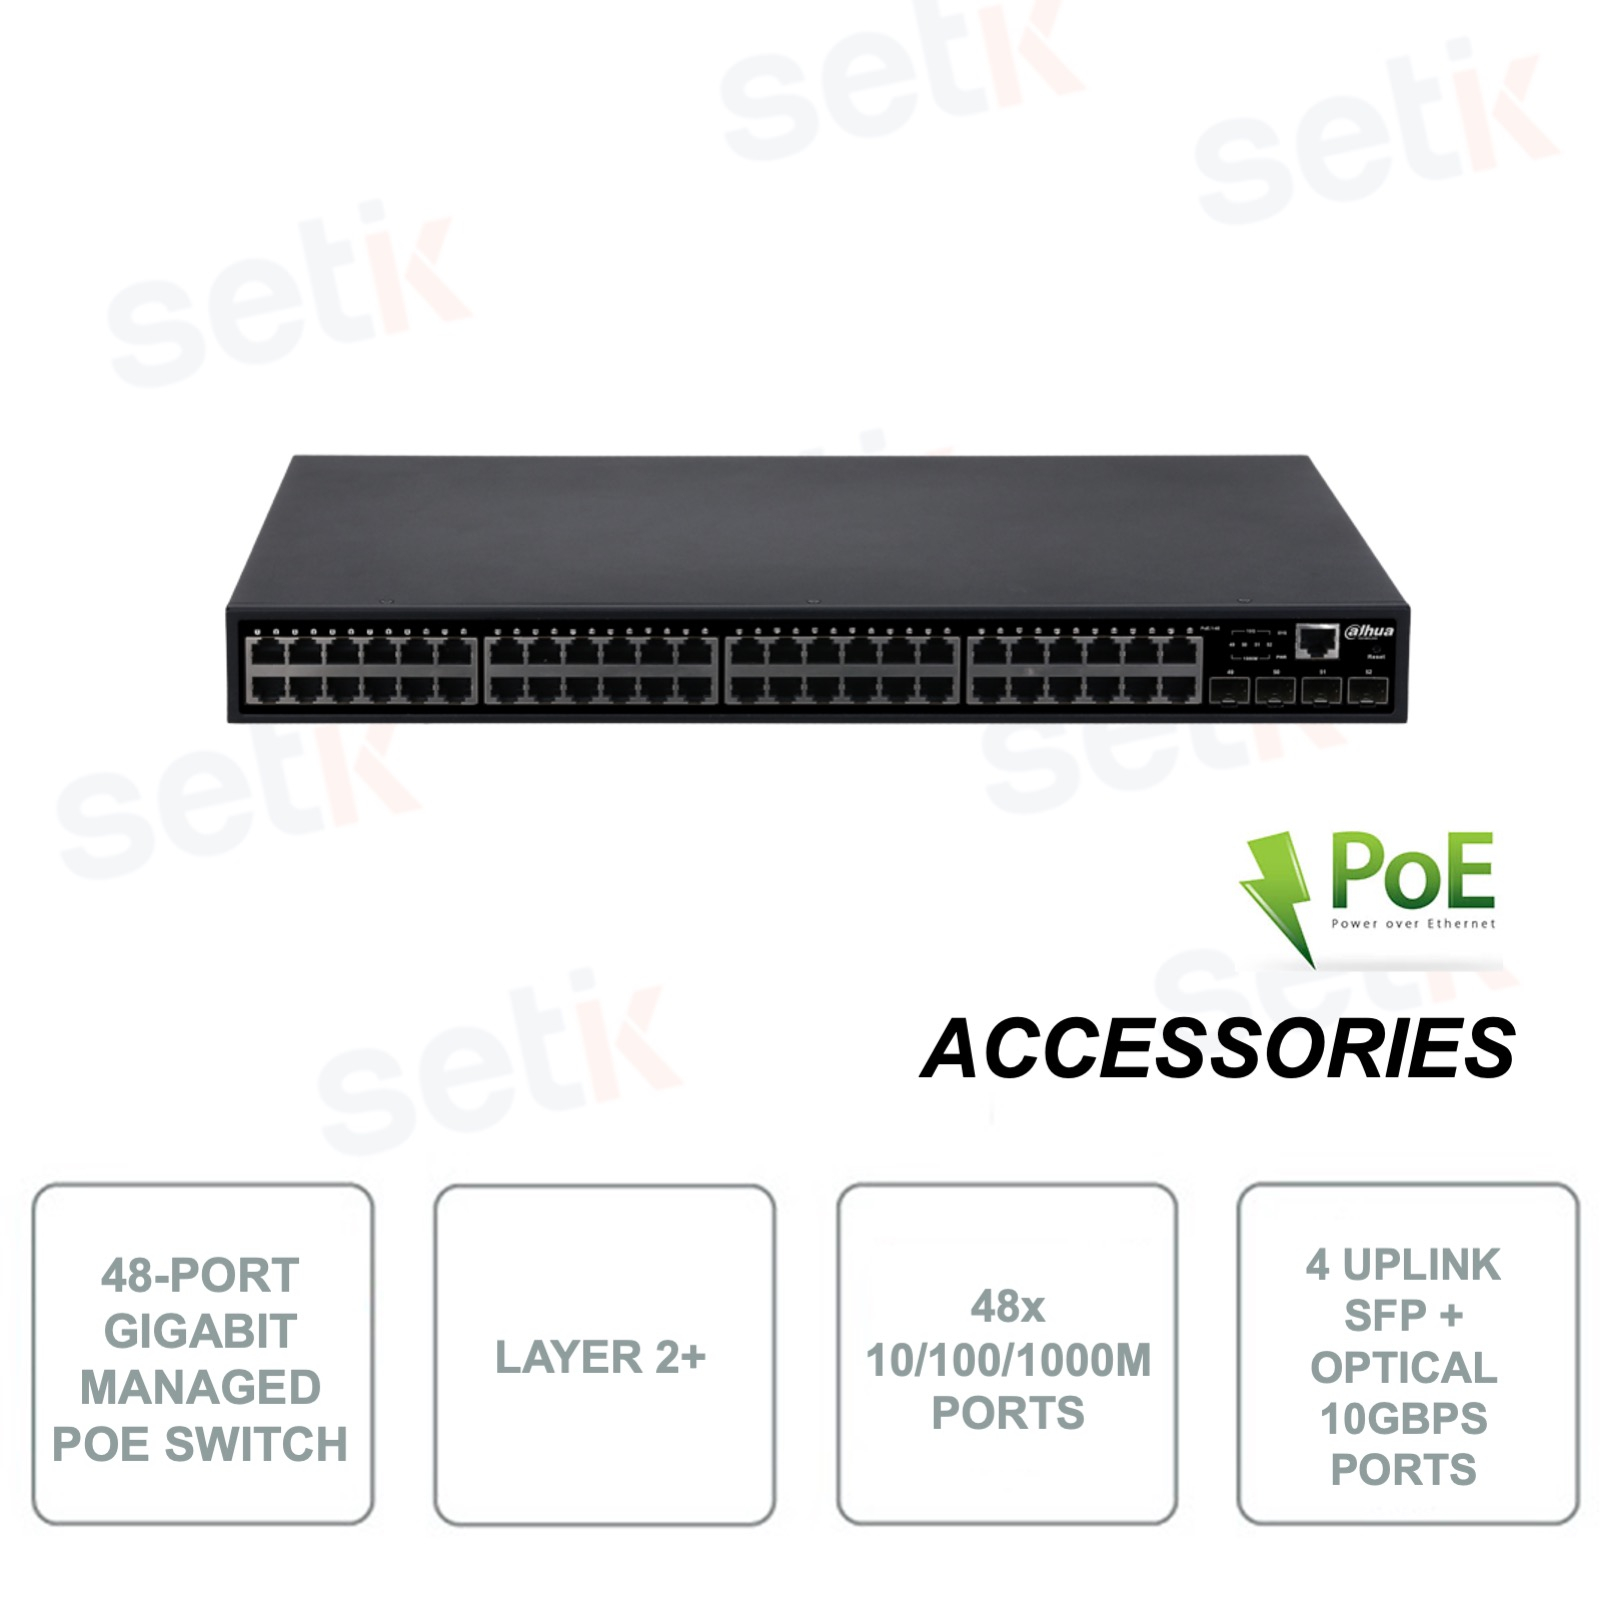 Fiber Ports PoE + Dahua 10Gbps for - Switch 48 Manageable Uplink - Ports Commercial Optical Network SFP + PFS5452-48GT4XF-400 - 4